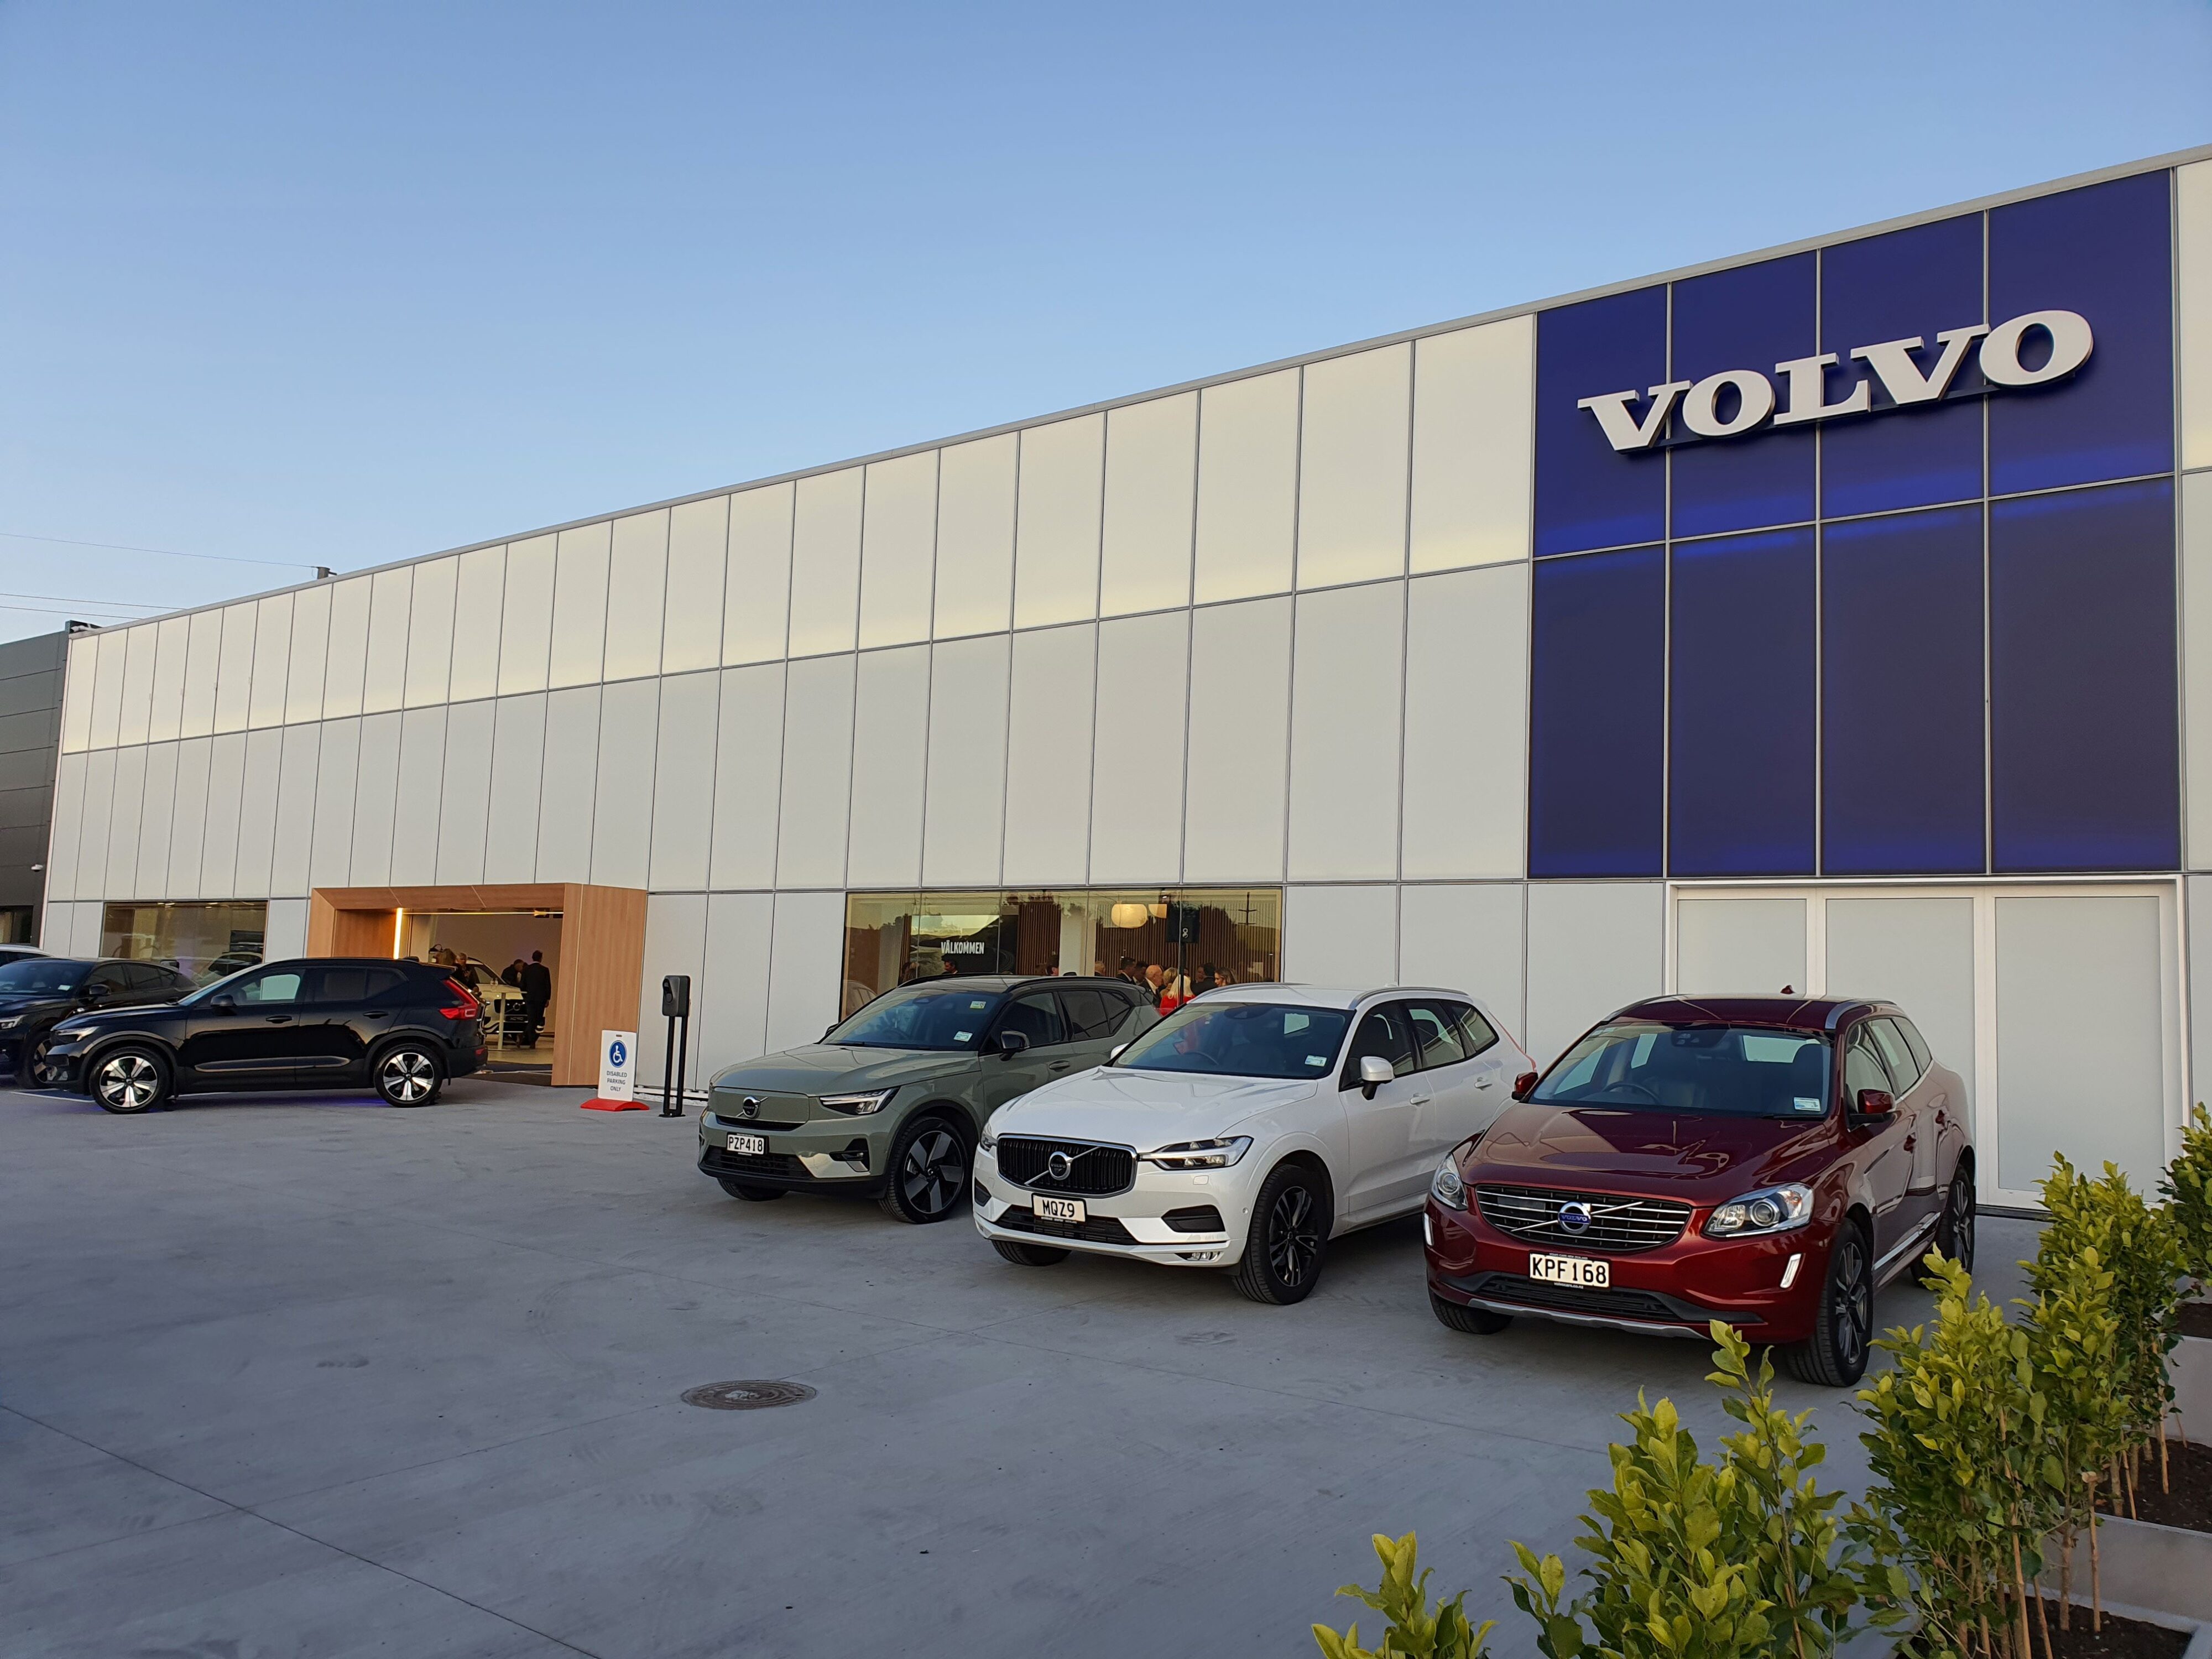 A photo of the new Volvo NZ flagship store as part of the Archibald & Shorter dealership in North Shore, Auckland